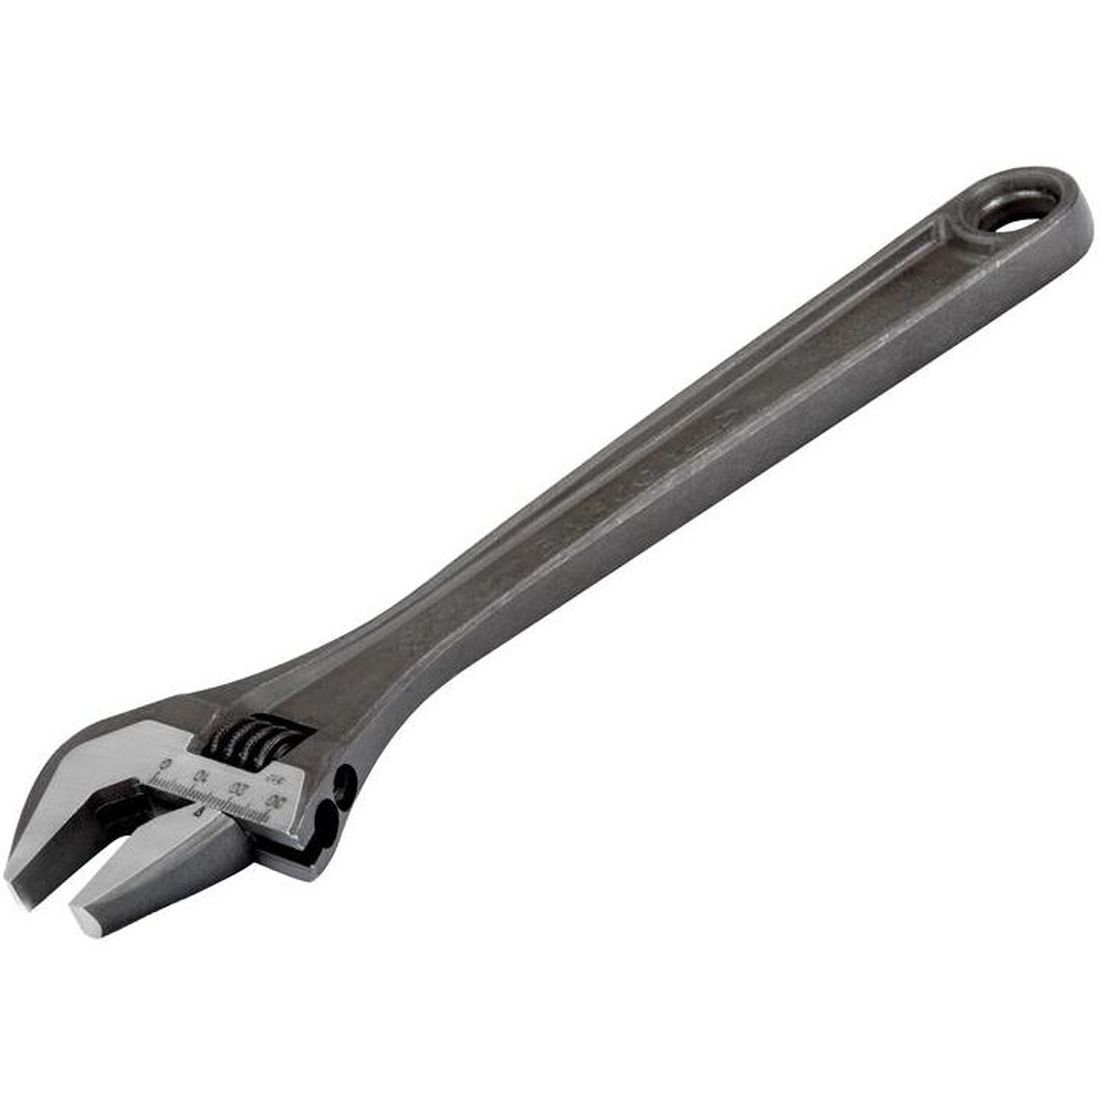 Bahco 8075 Black Adjustable Wrench 450mm (18in)                                       